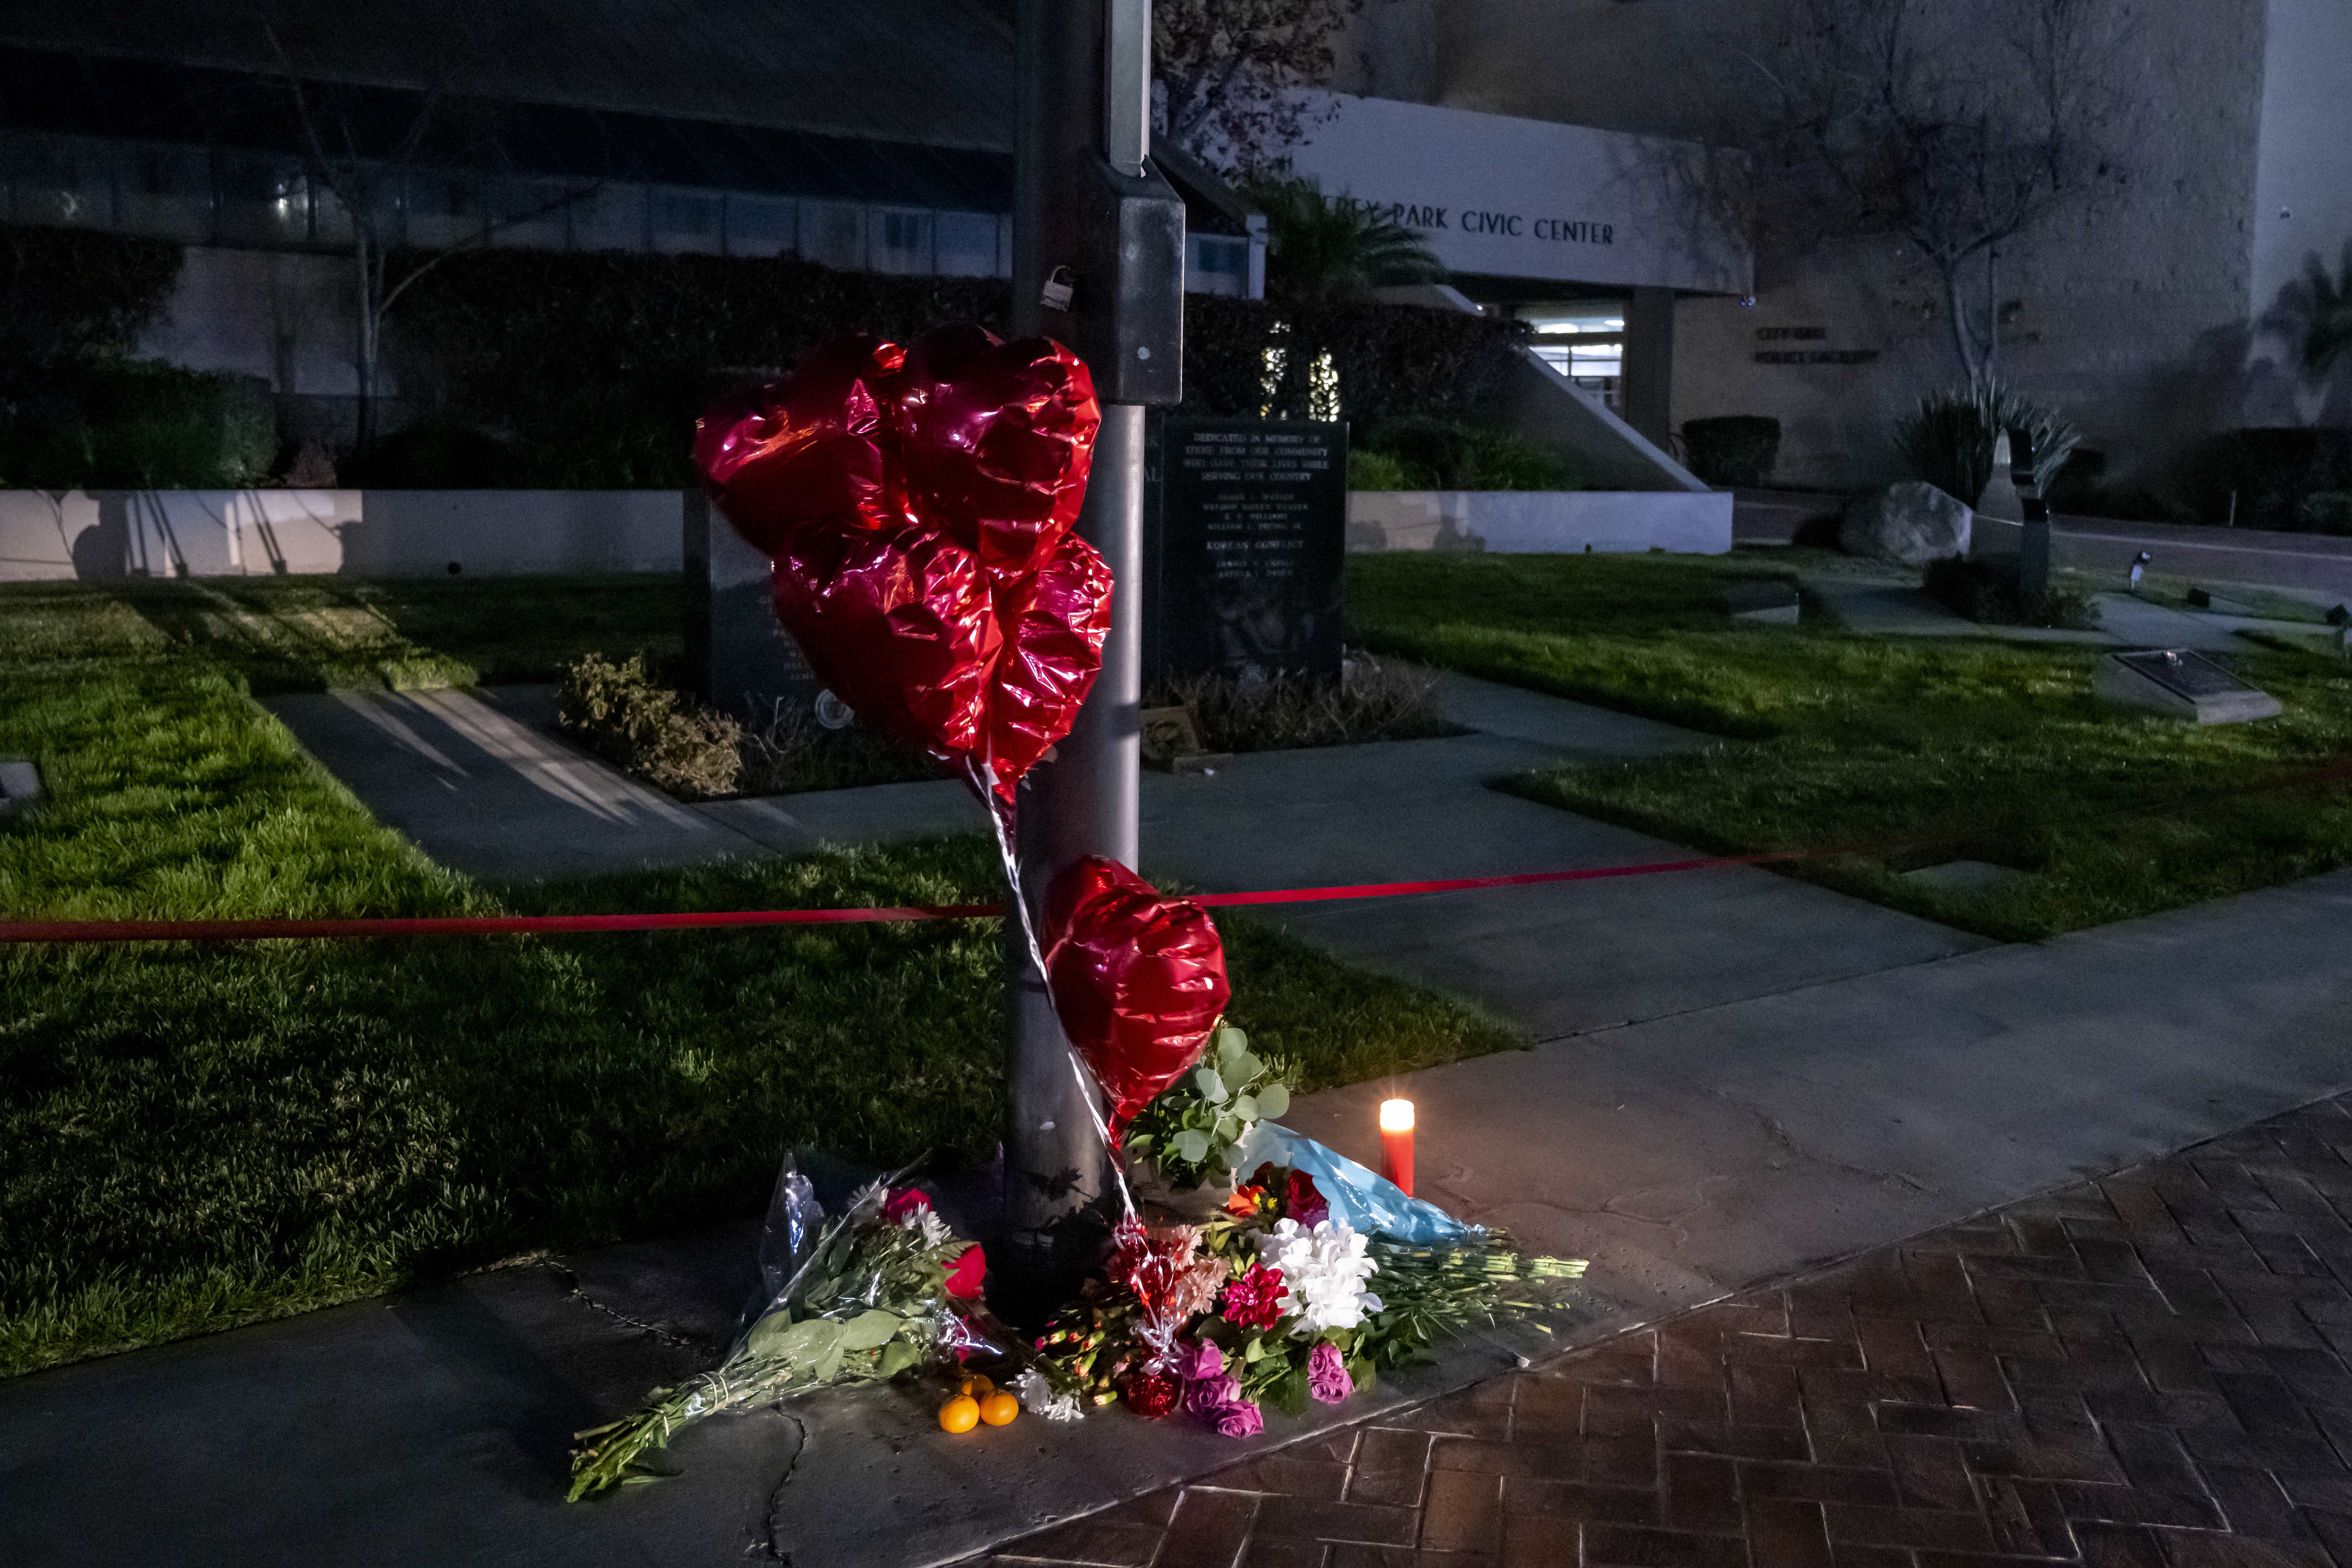 A memorial is building at City Hall in Monterey Park on Sunday, January 22.